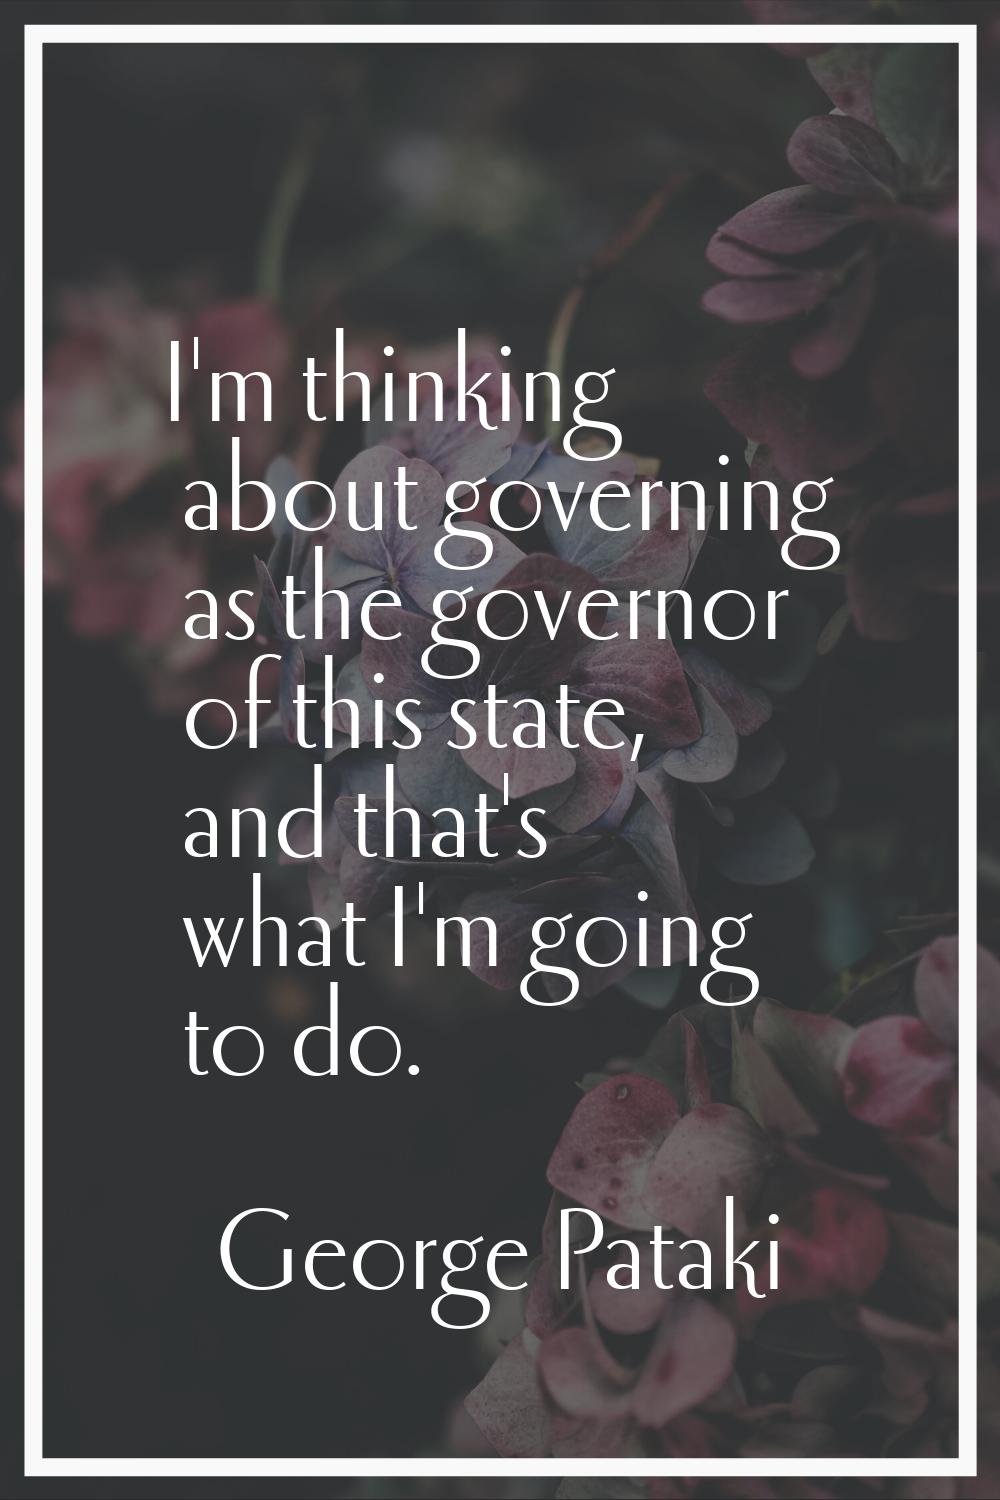 I'm thinking about governing as the governor of this state, and that's what I'm going to do.